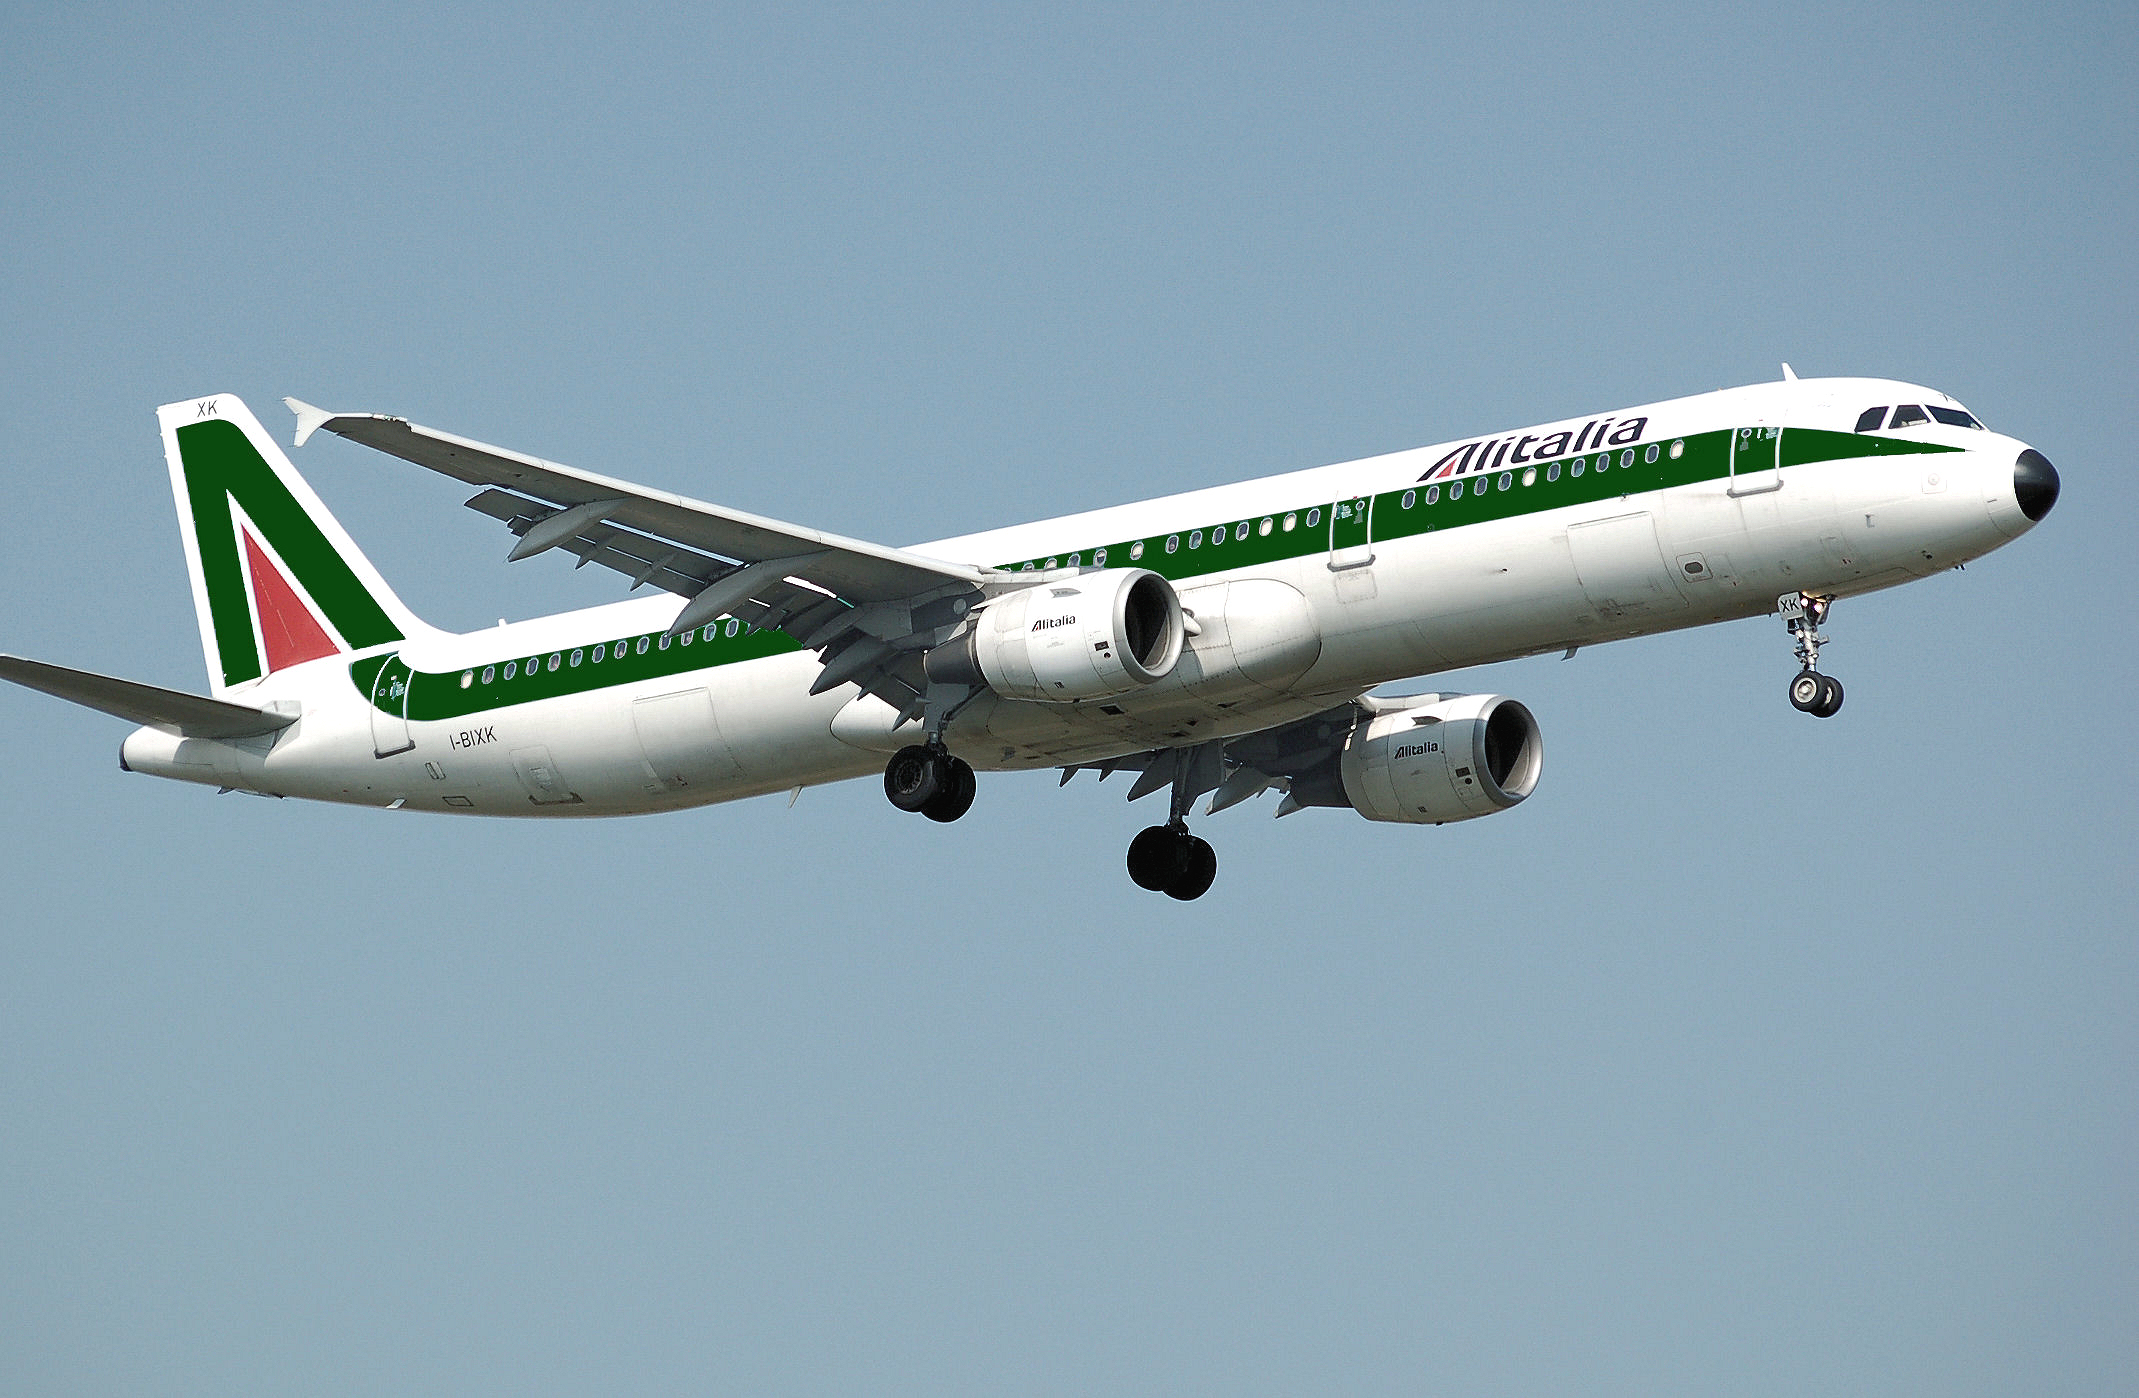 The airline Alitalia. Official site.